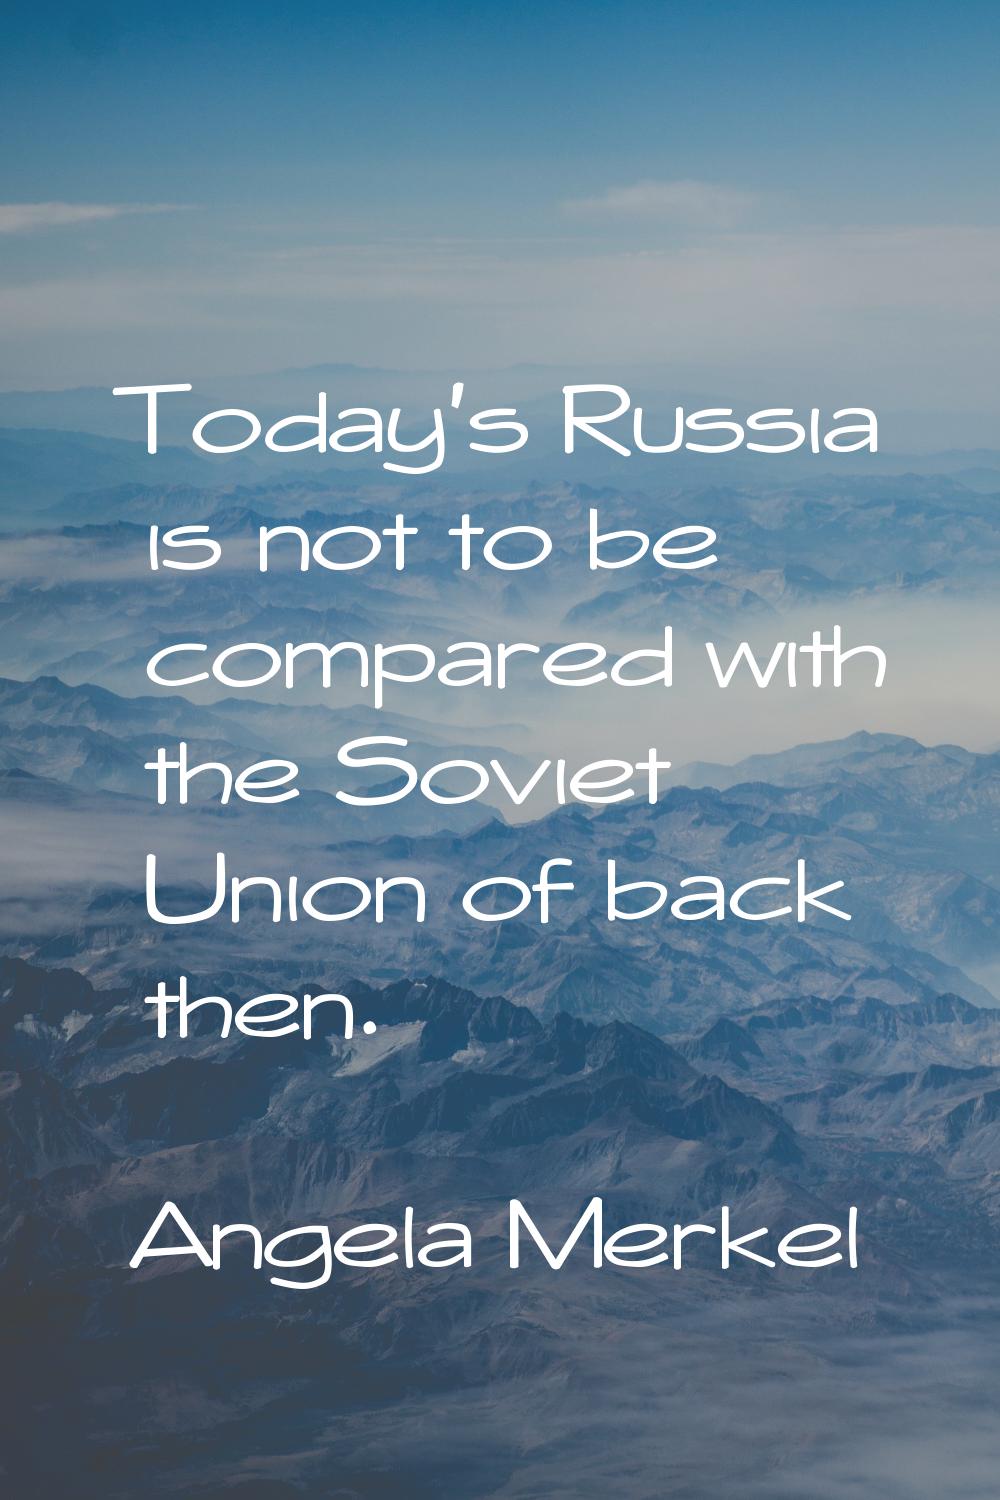 Today's Russia is not to be compared with the Soviet Union of back then.